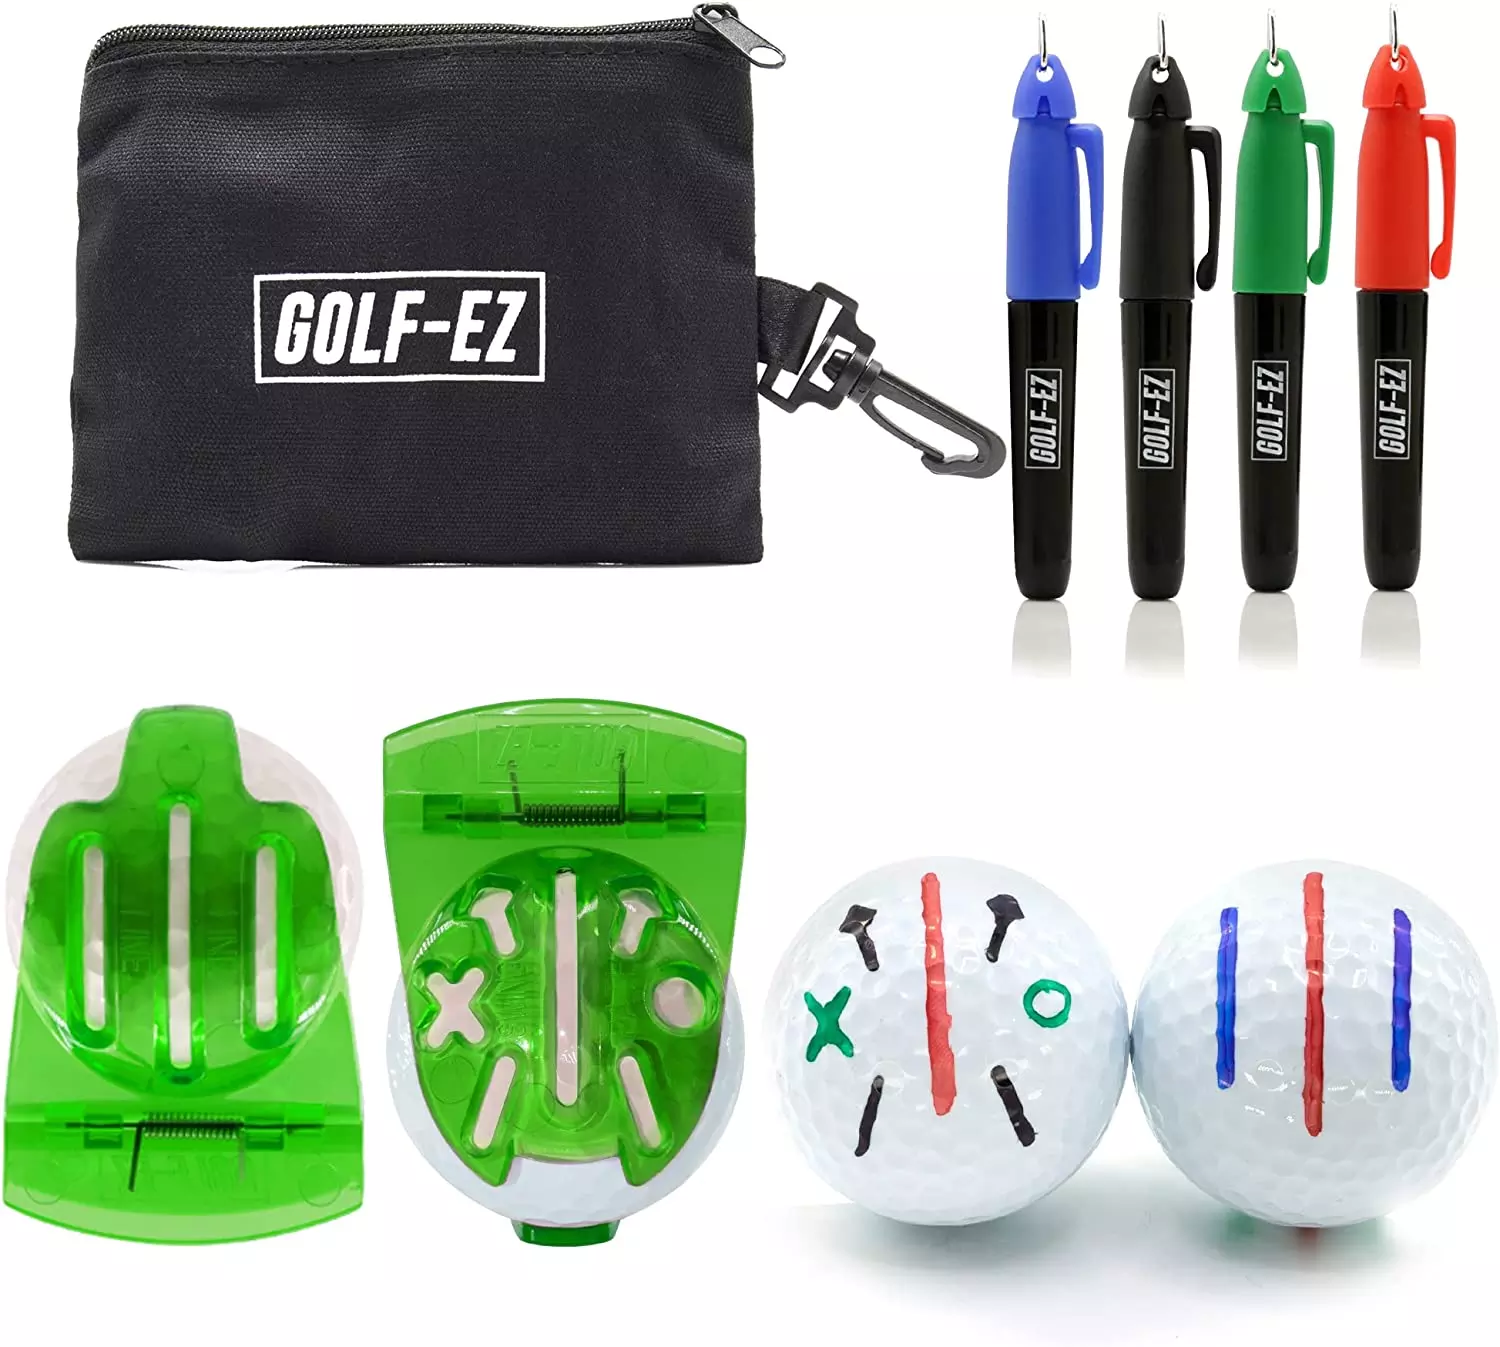 Golf-EZ TRI-LINE Golf Ball Alignment Kit comes with various permanent markers, a tool to mark your ball, and a bag to carry all equipment within